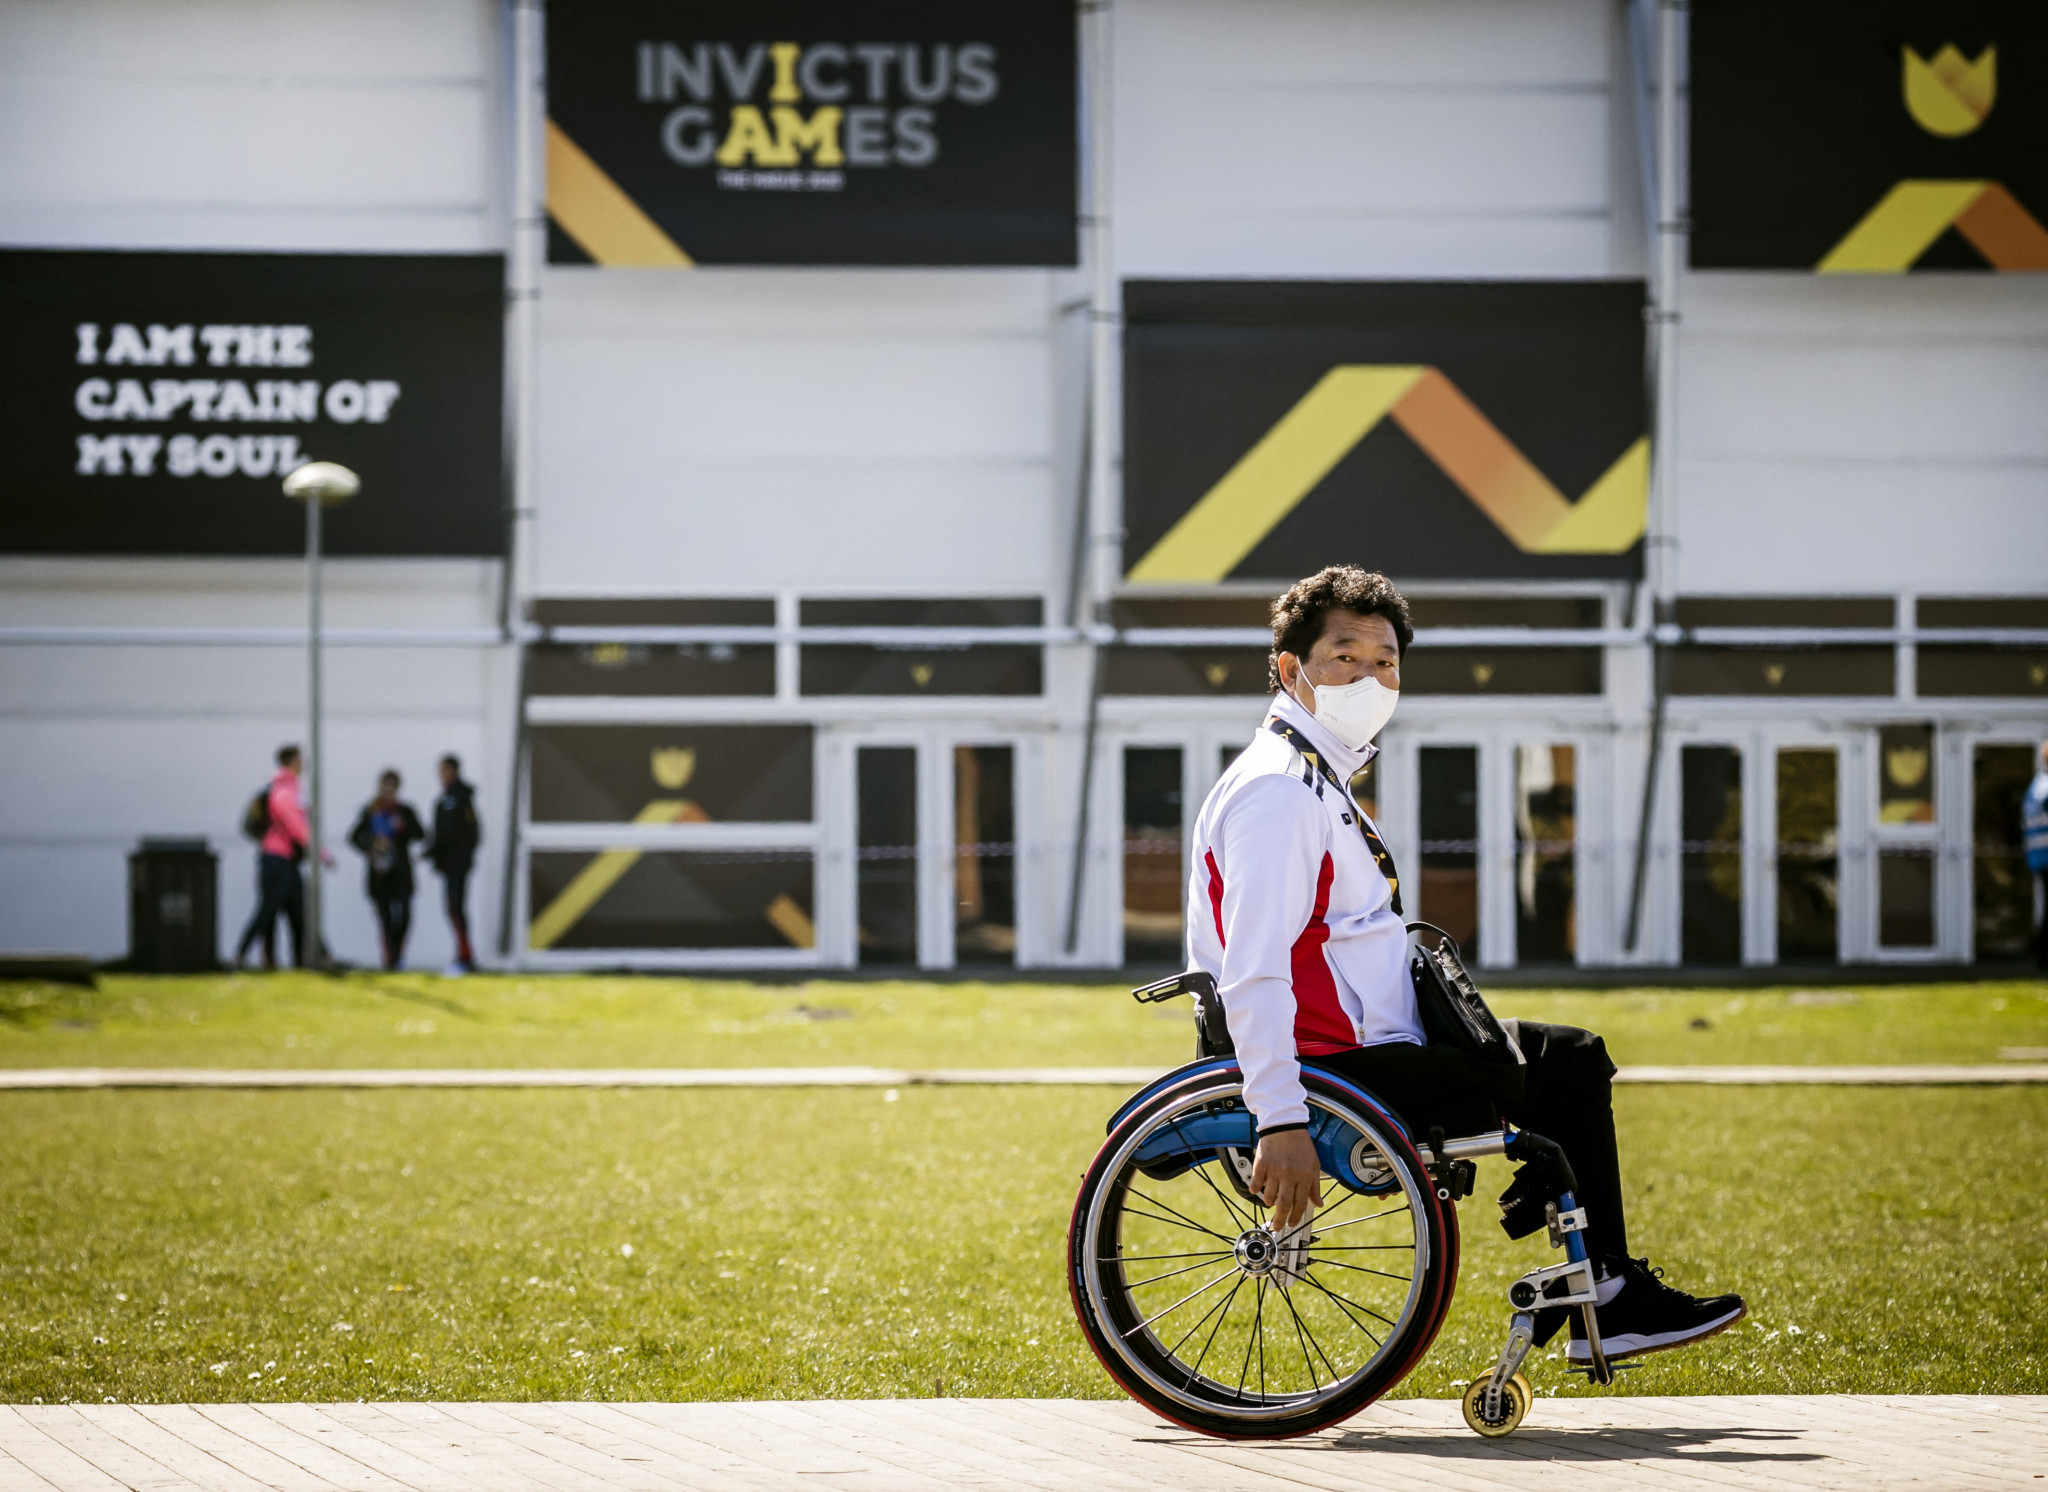 The Hague ready to stage Invictus Games after two years of COVID-19 postponements